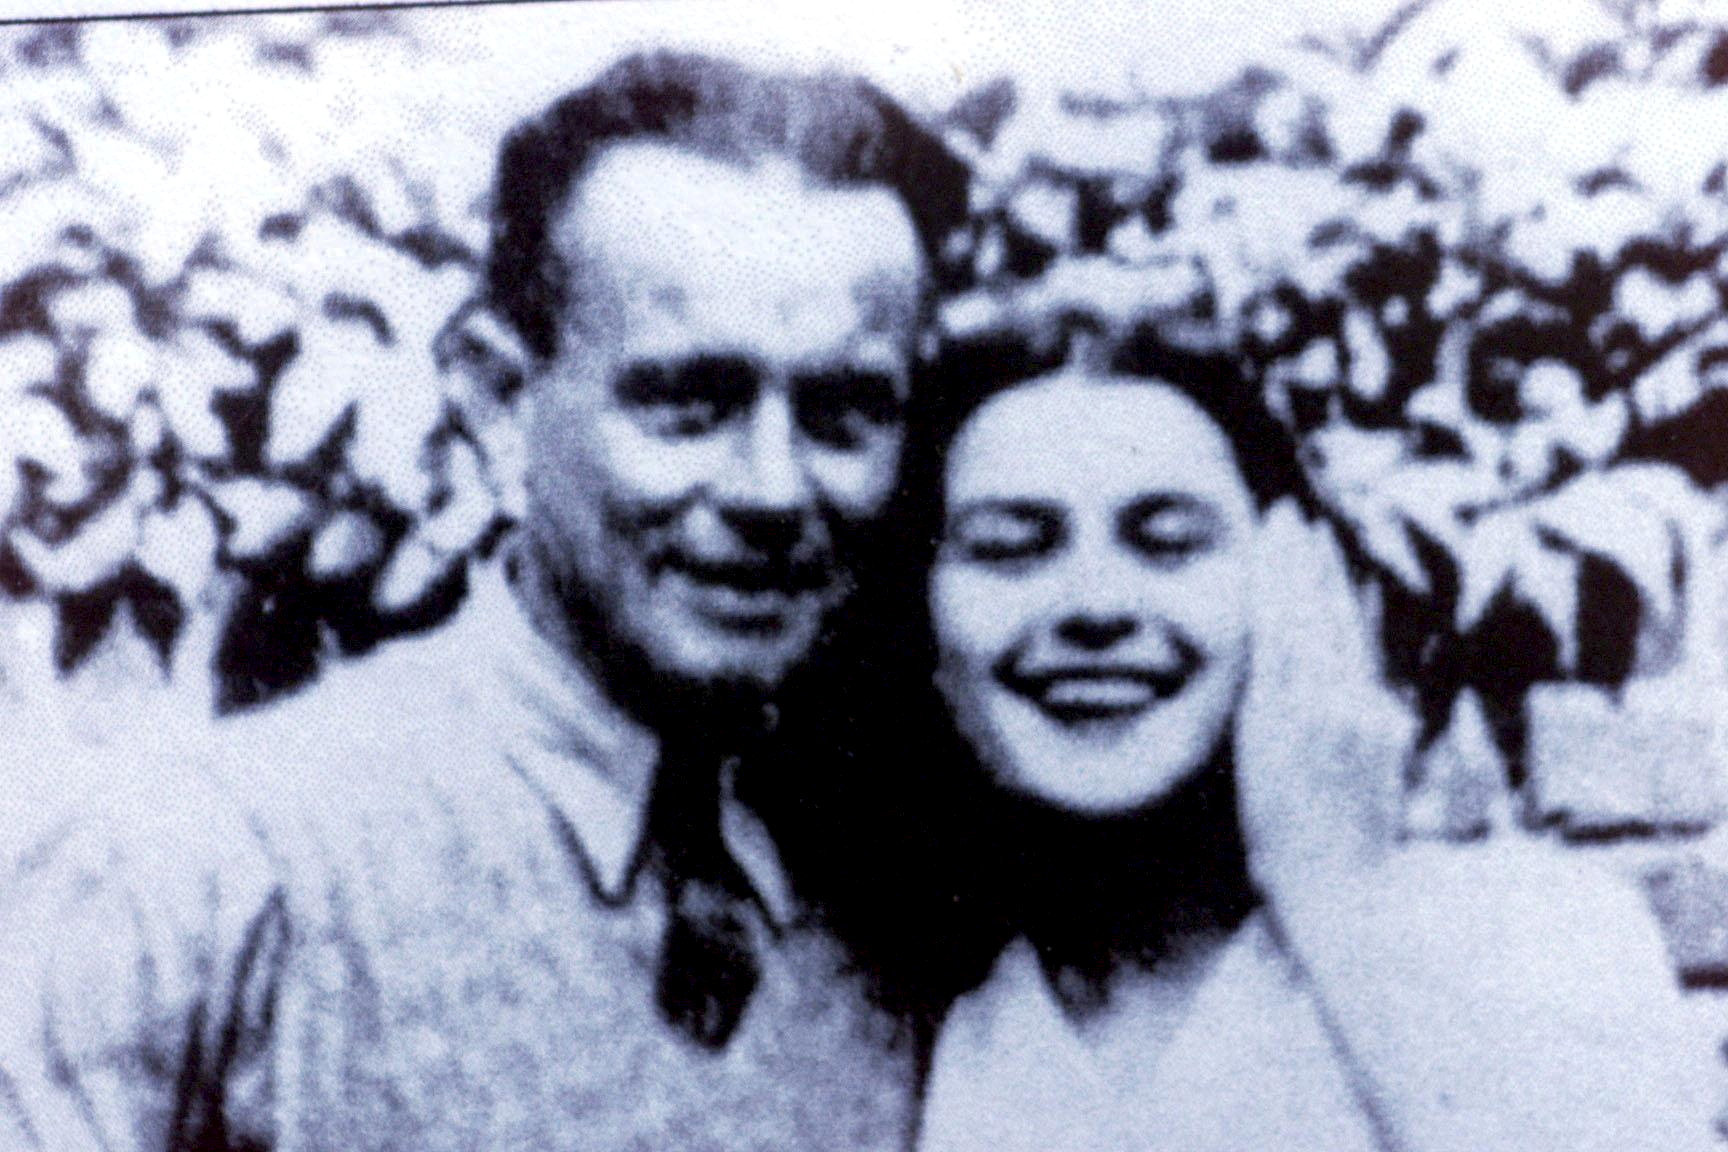 WW2 heroine Violette Szabo and her husband Etienne. Picture: SWNS 